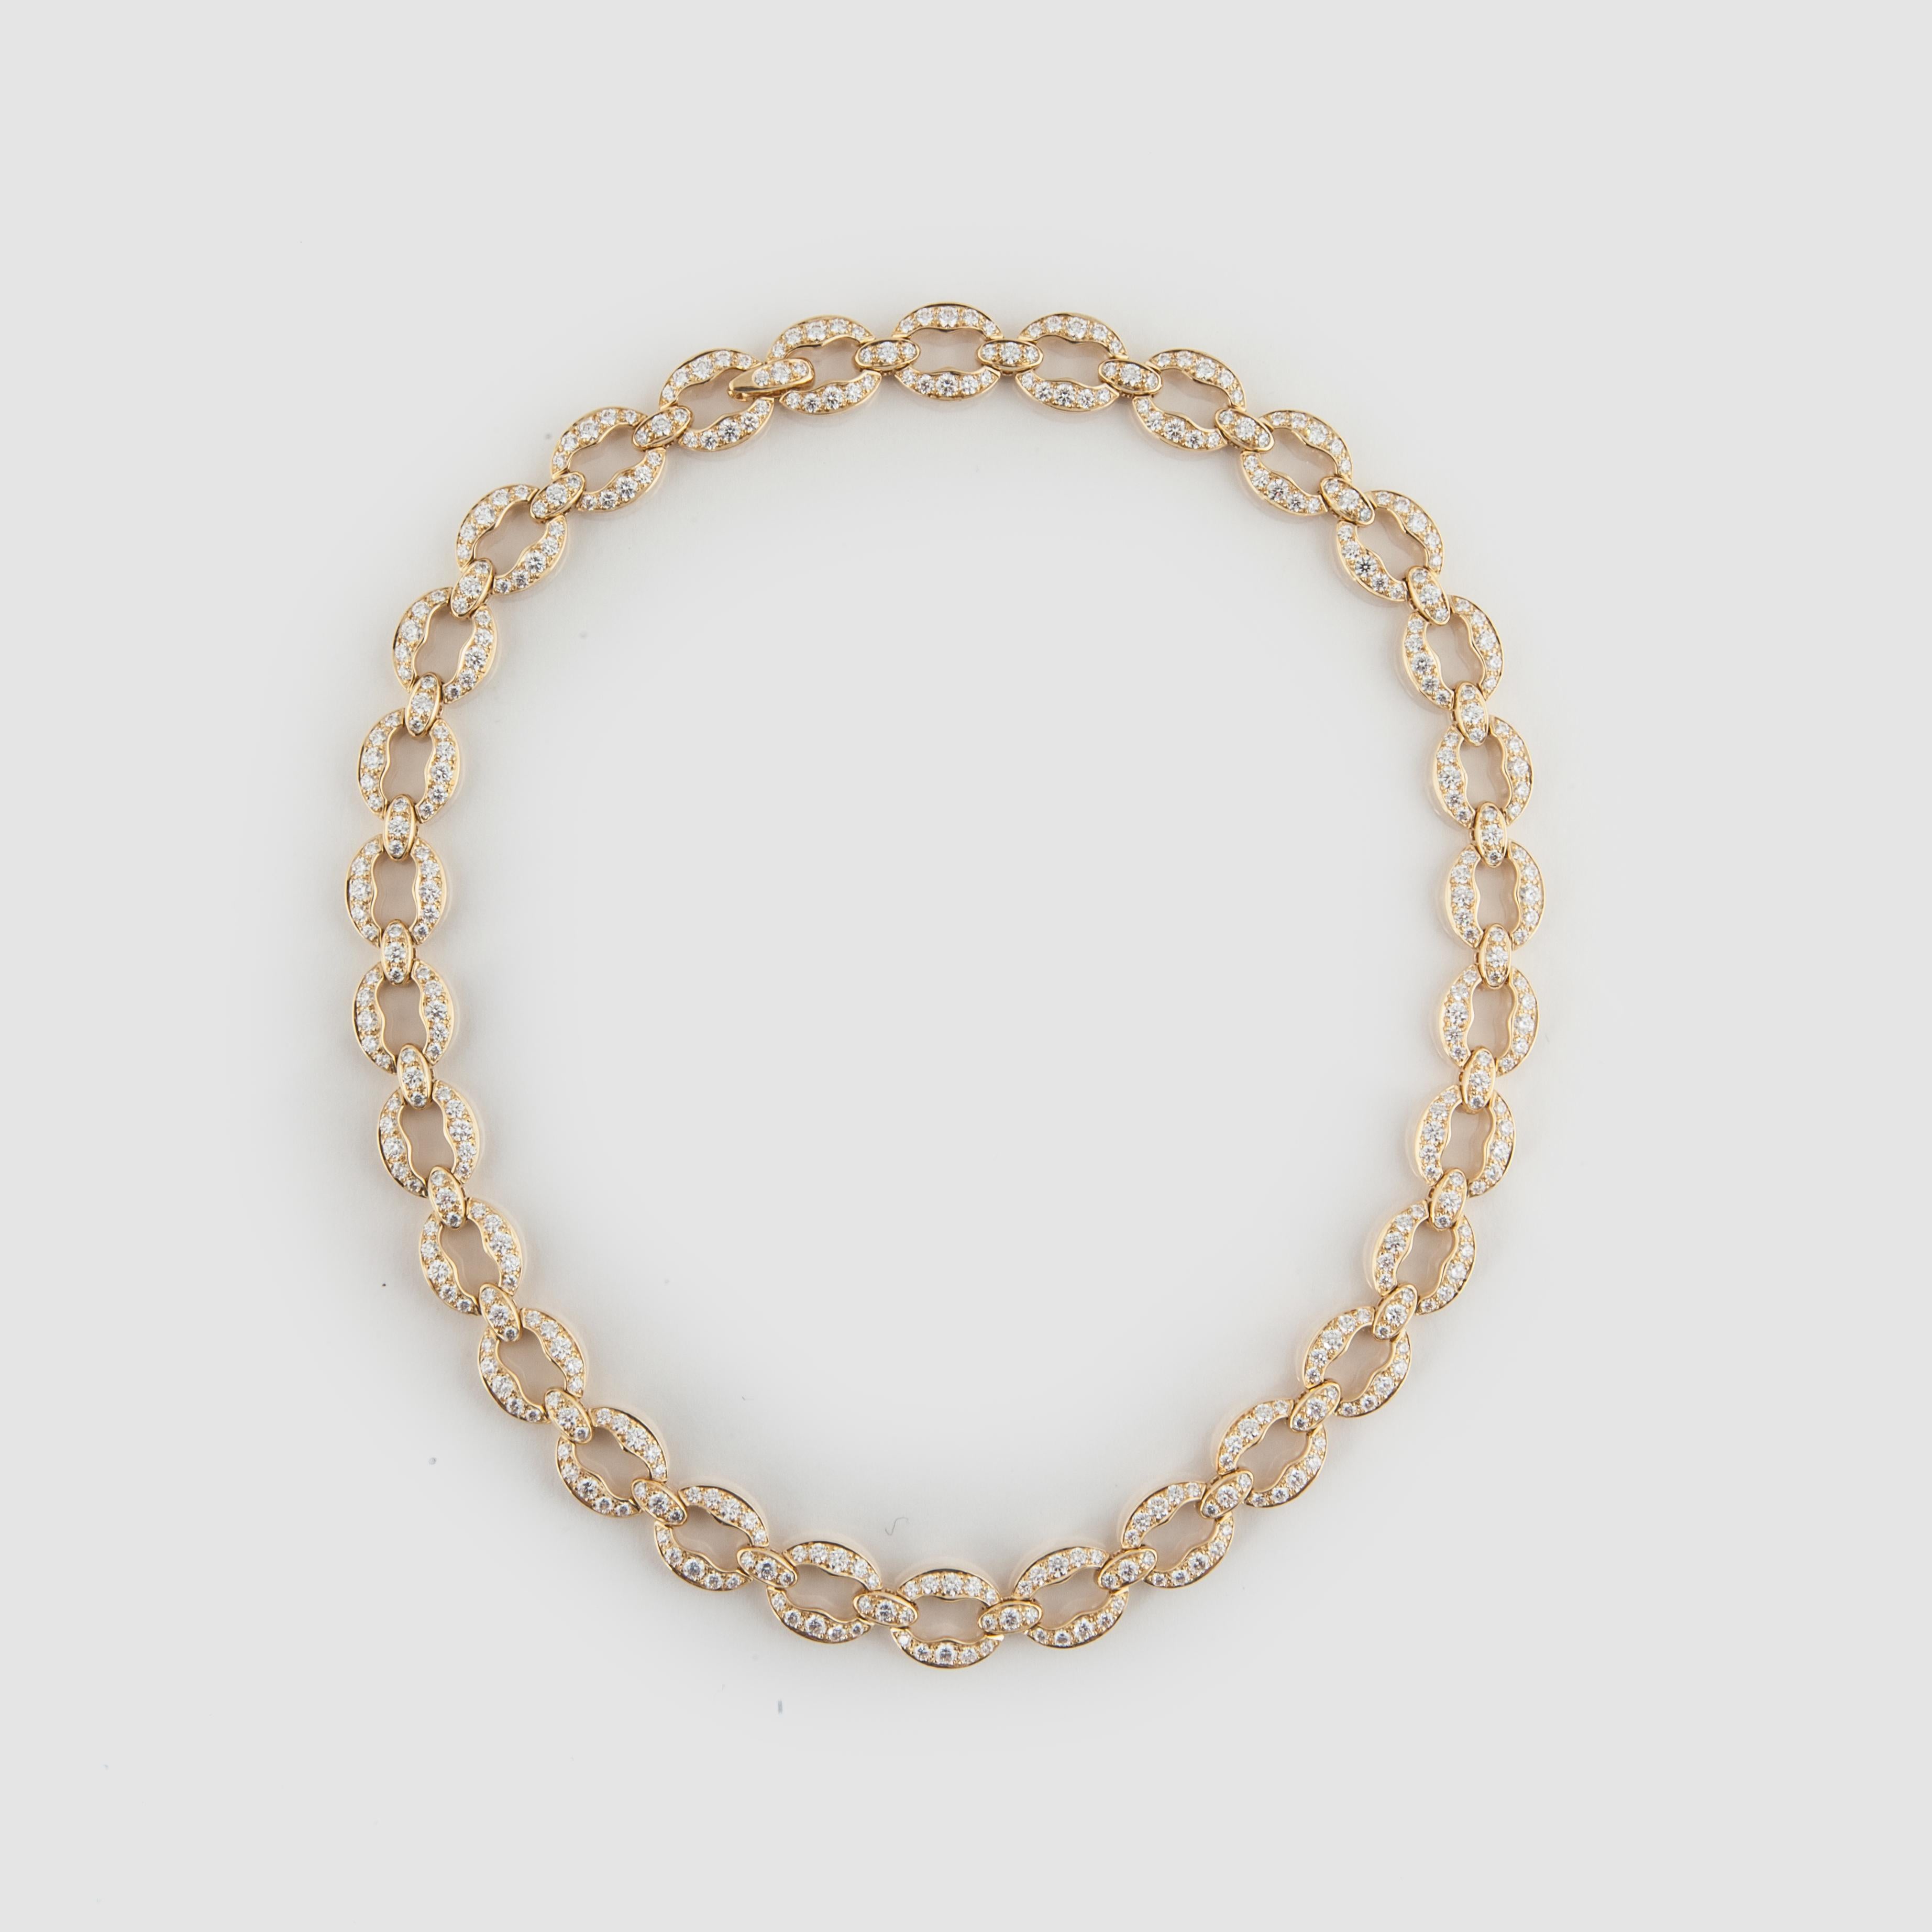 Tiffany & Co. necklace composed of 18K yellow gold marked 